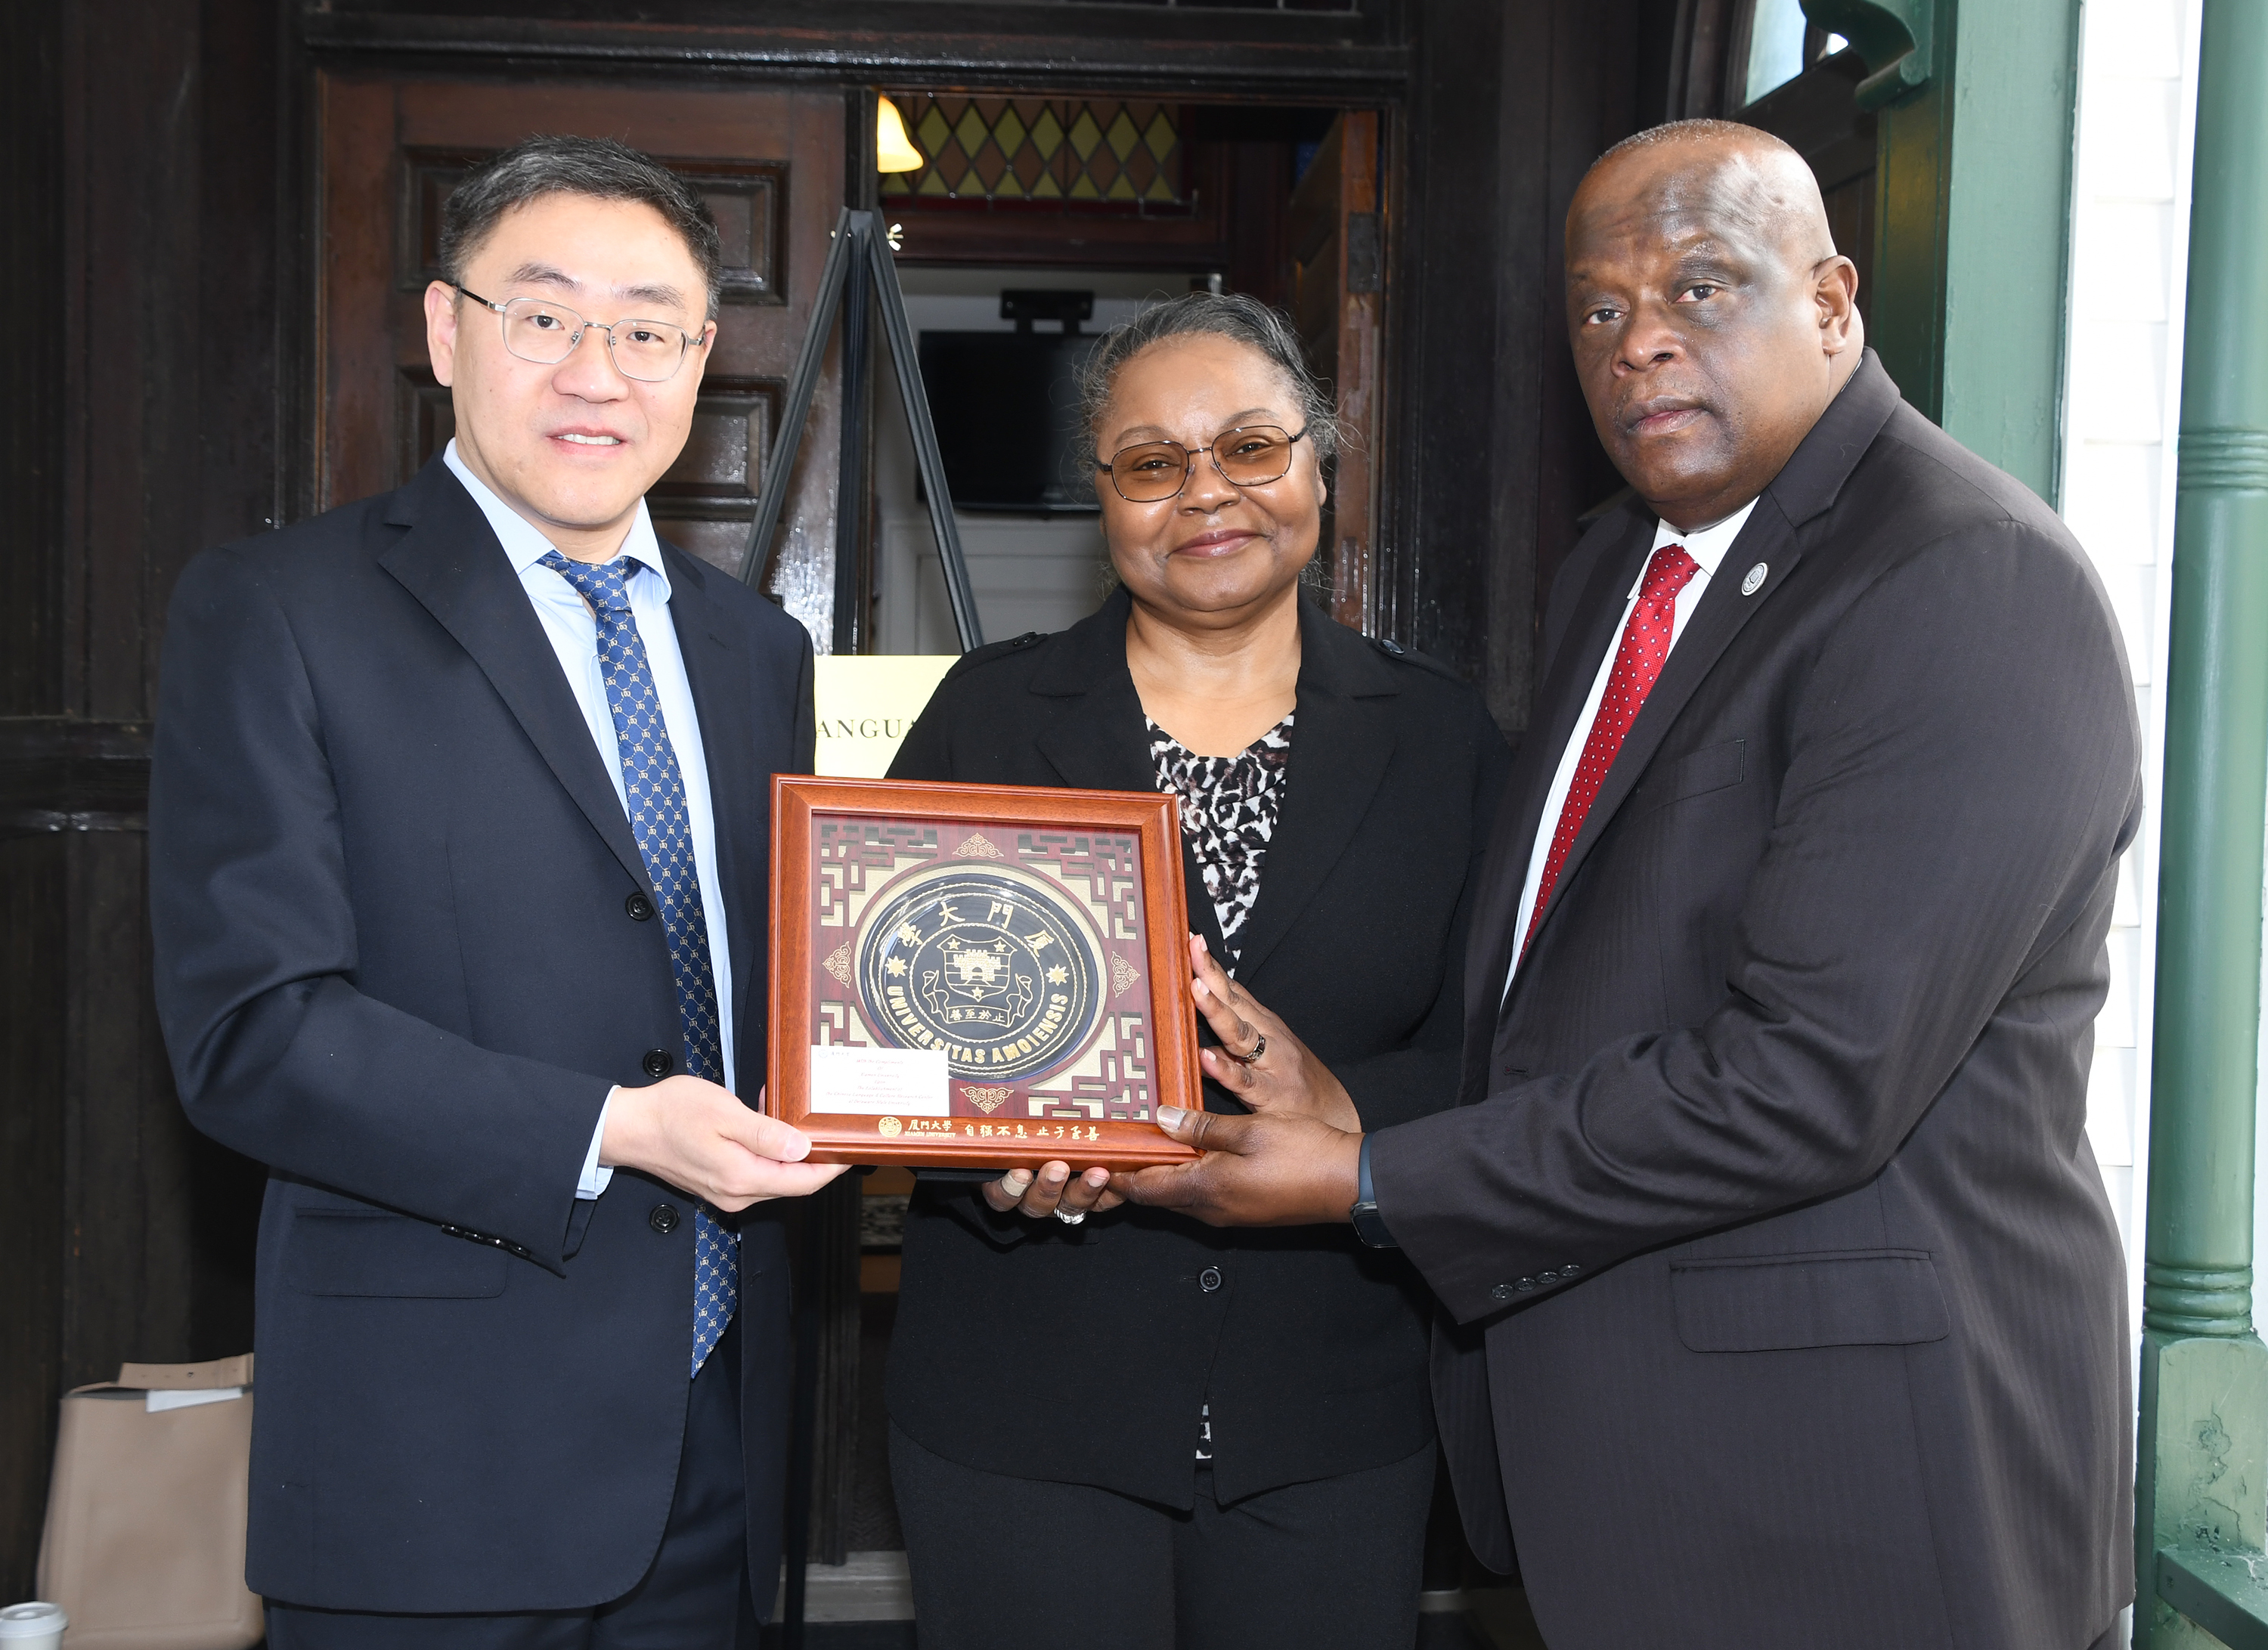 Provost Saundra DeLauder and Tony Boyle accept a gift on behalf of DSU from Dr. Ying Fang (l) of Xiamen University.